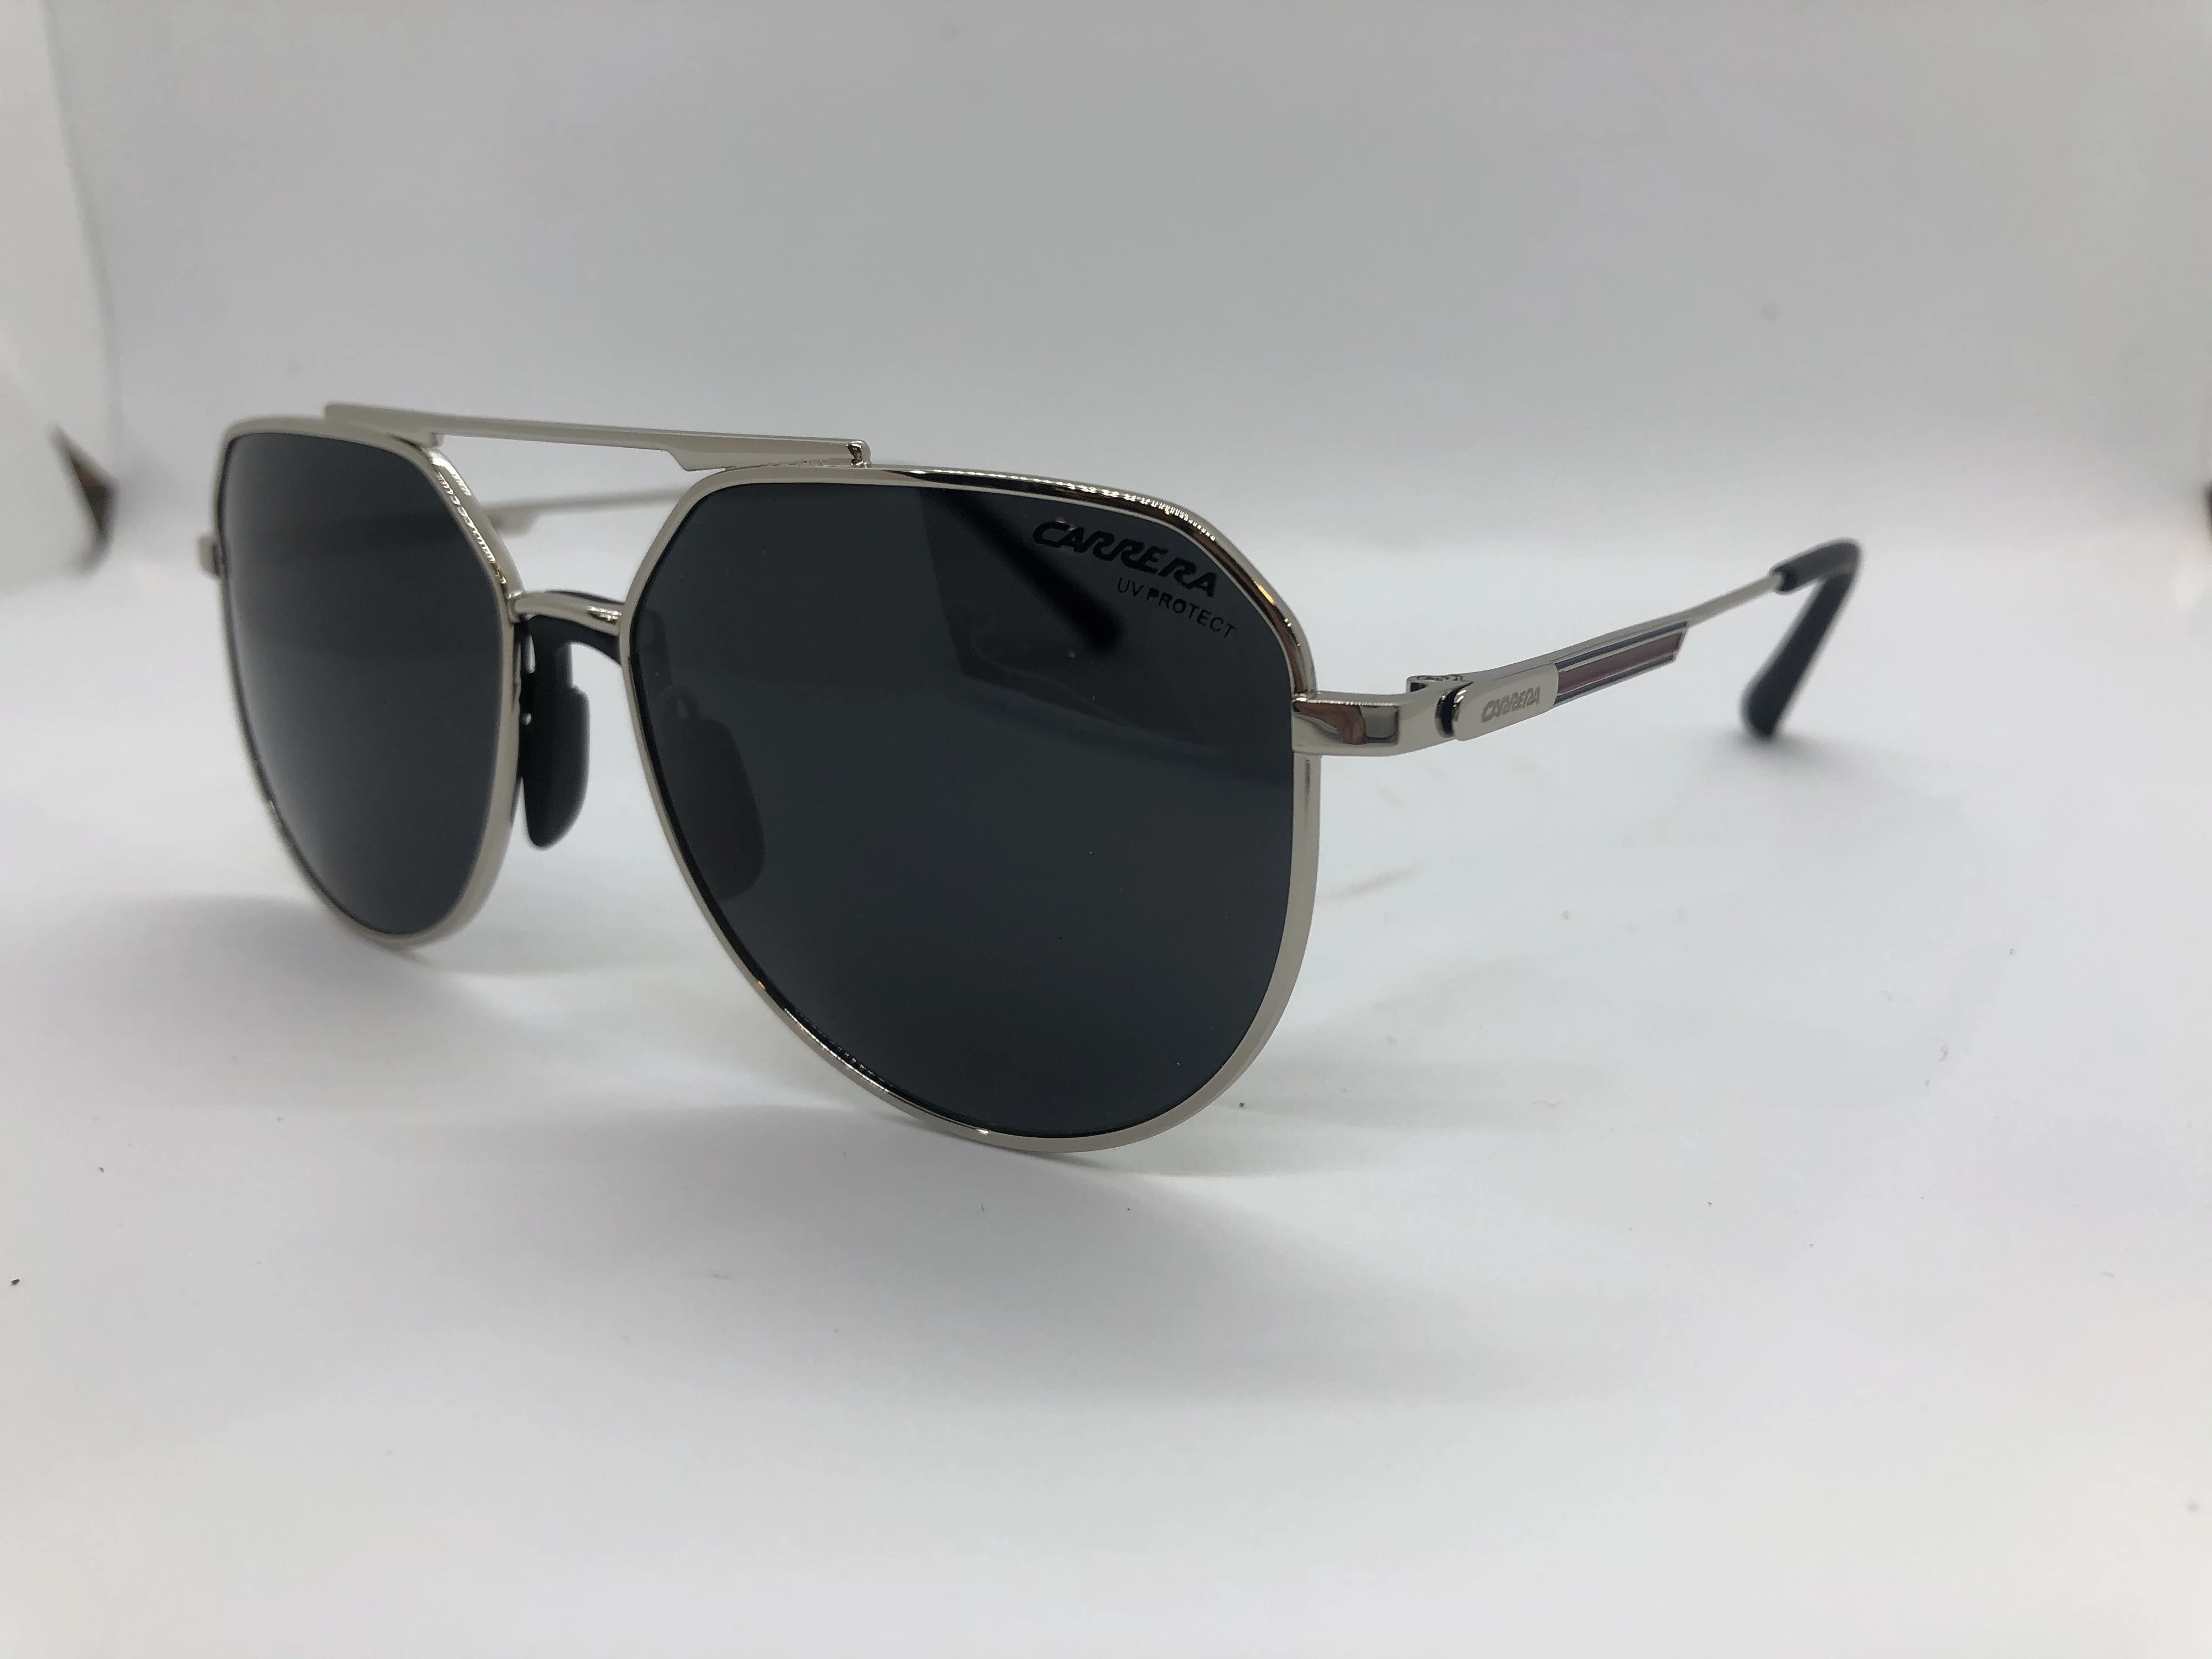 Carrera sunglasses - with a modern design - with a silver metal frame - black lenses for men